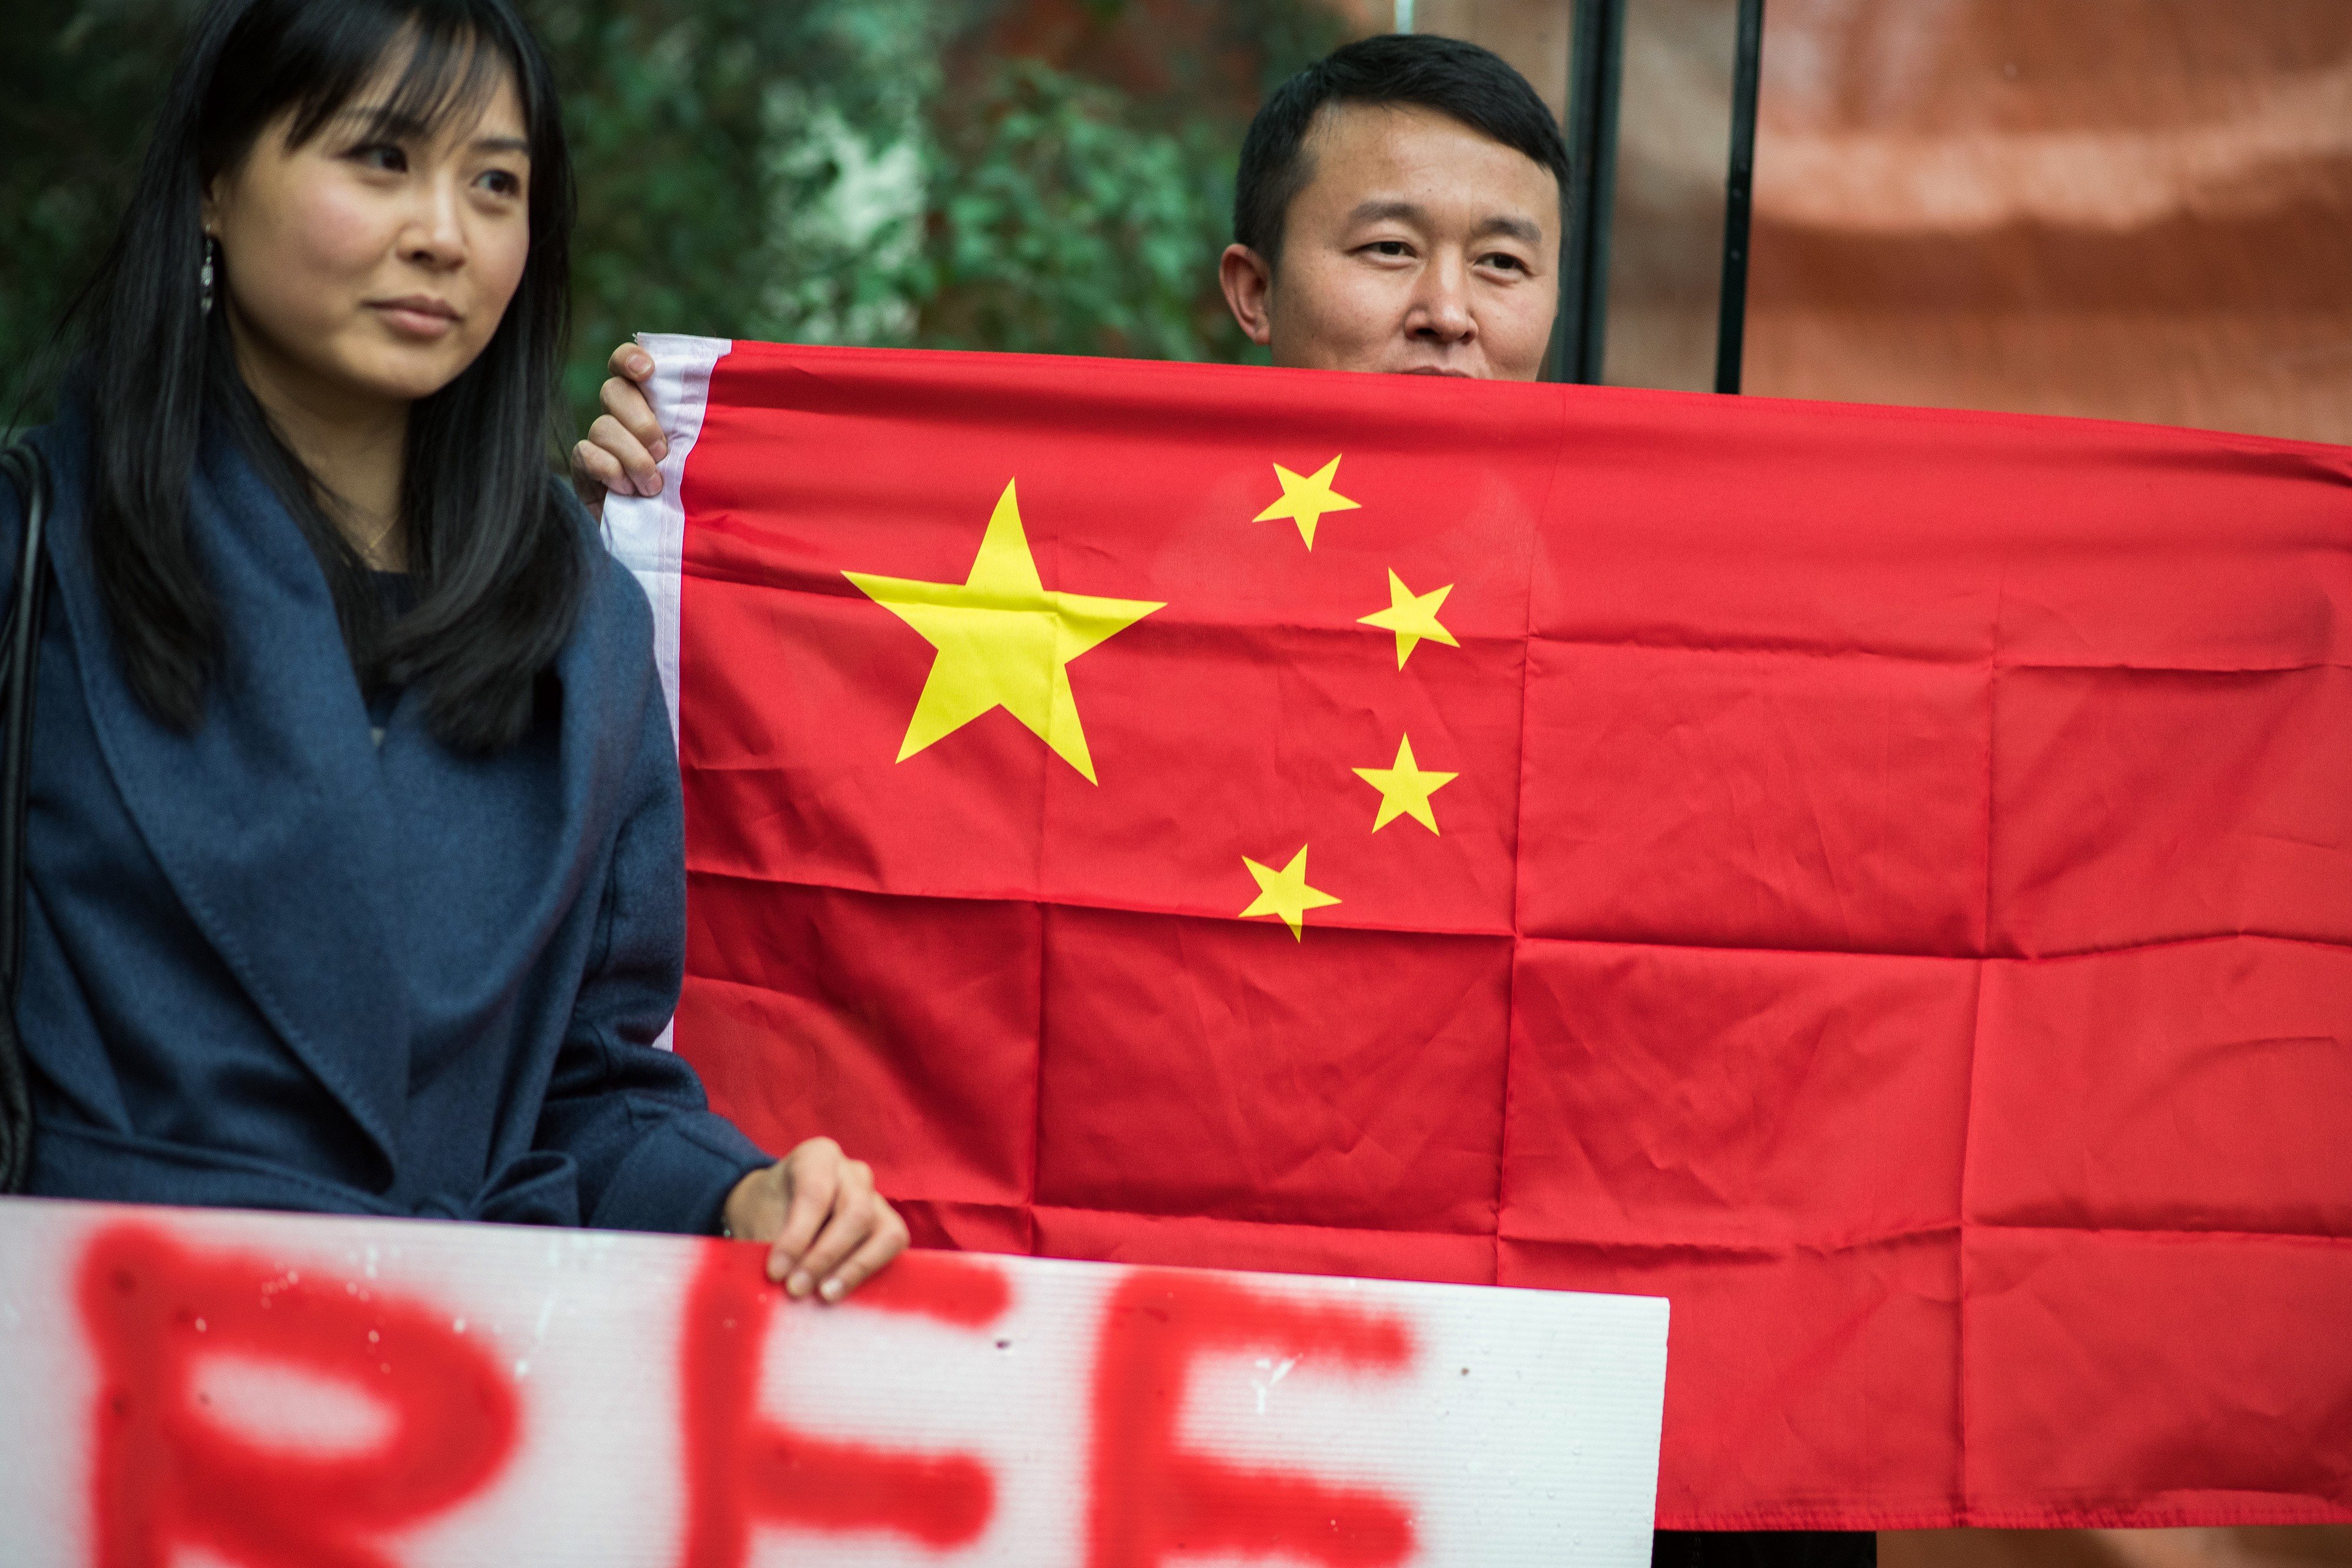 A man holds a Chinese flag in support of Huawei executive Meng Wanzhou outside a bail hearing in Vancouver on December 11. China has reacted to the incident by hitting back at Canada, instead of winning more friends around the world. Photo: Bloomberg